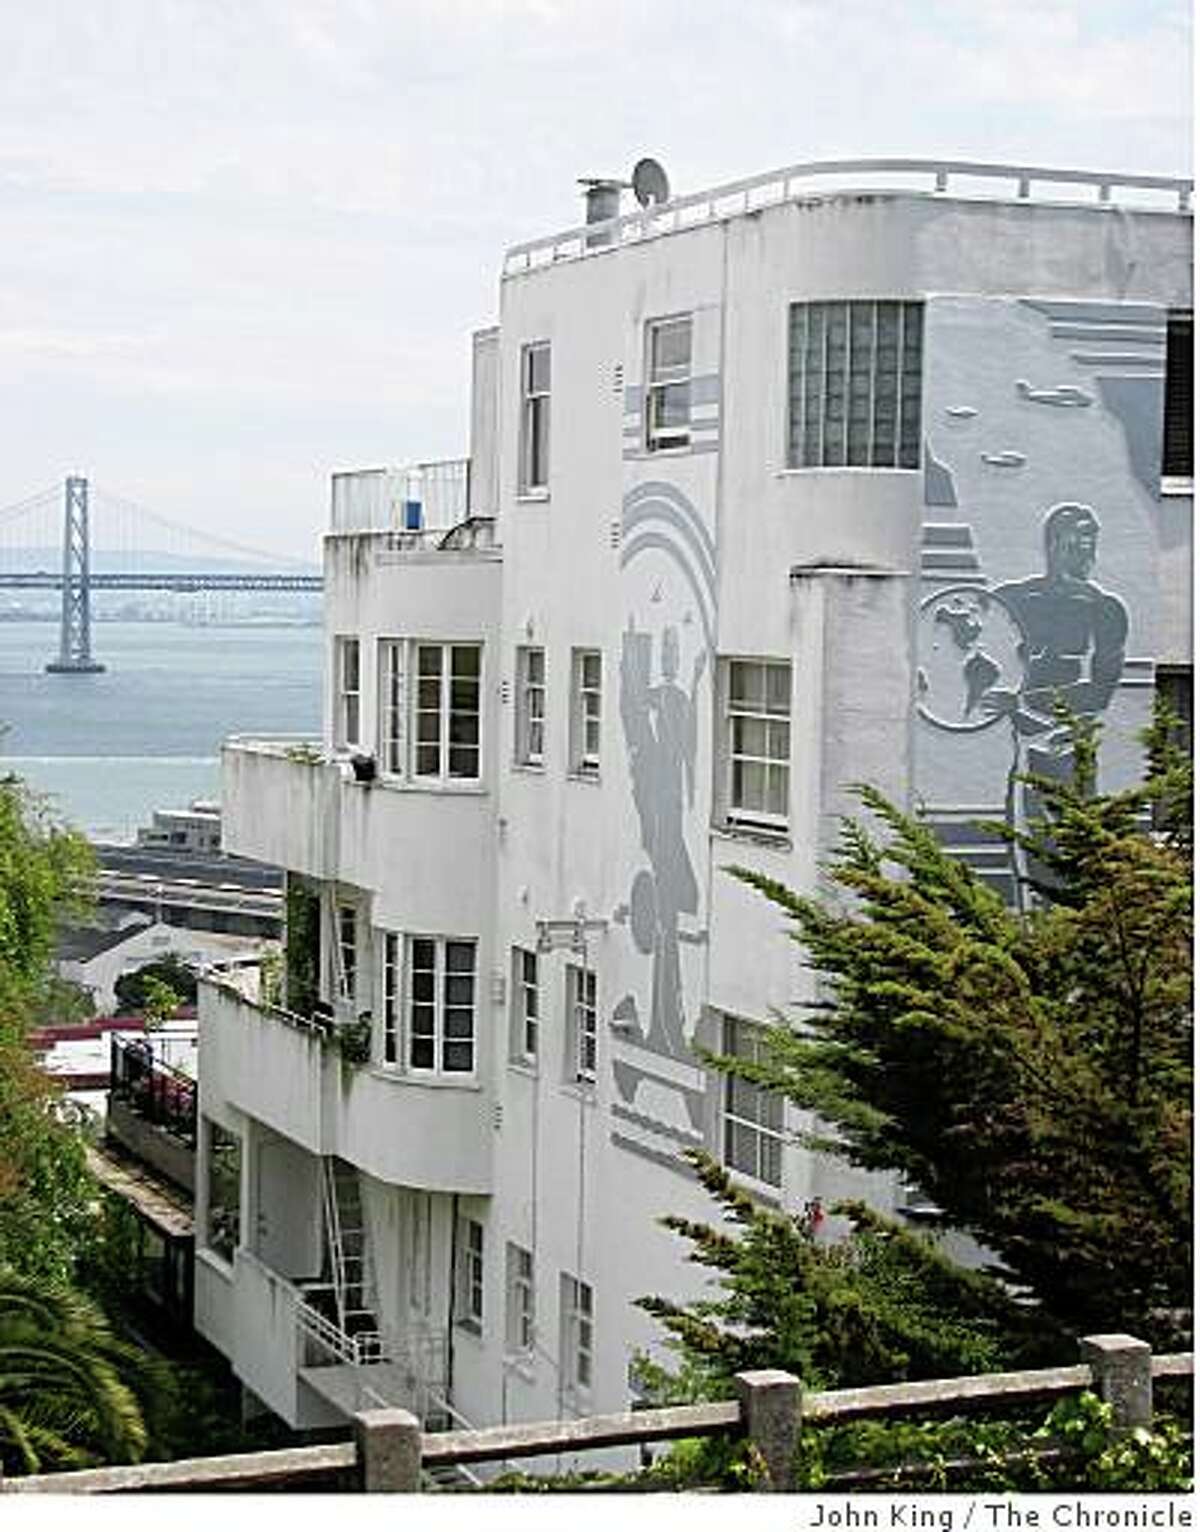 And here's 1360 Montgomery today, perched on the steep slopes of Telegraph Hill. The bas relief-style design is still visible on the exterior and the view is just as good too.